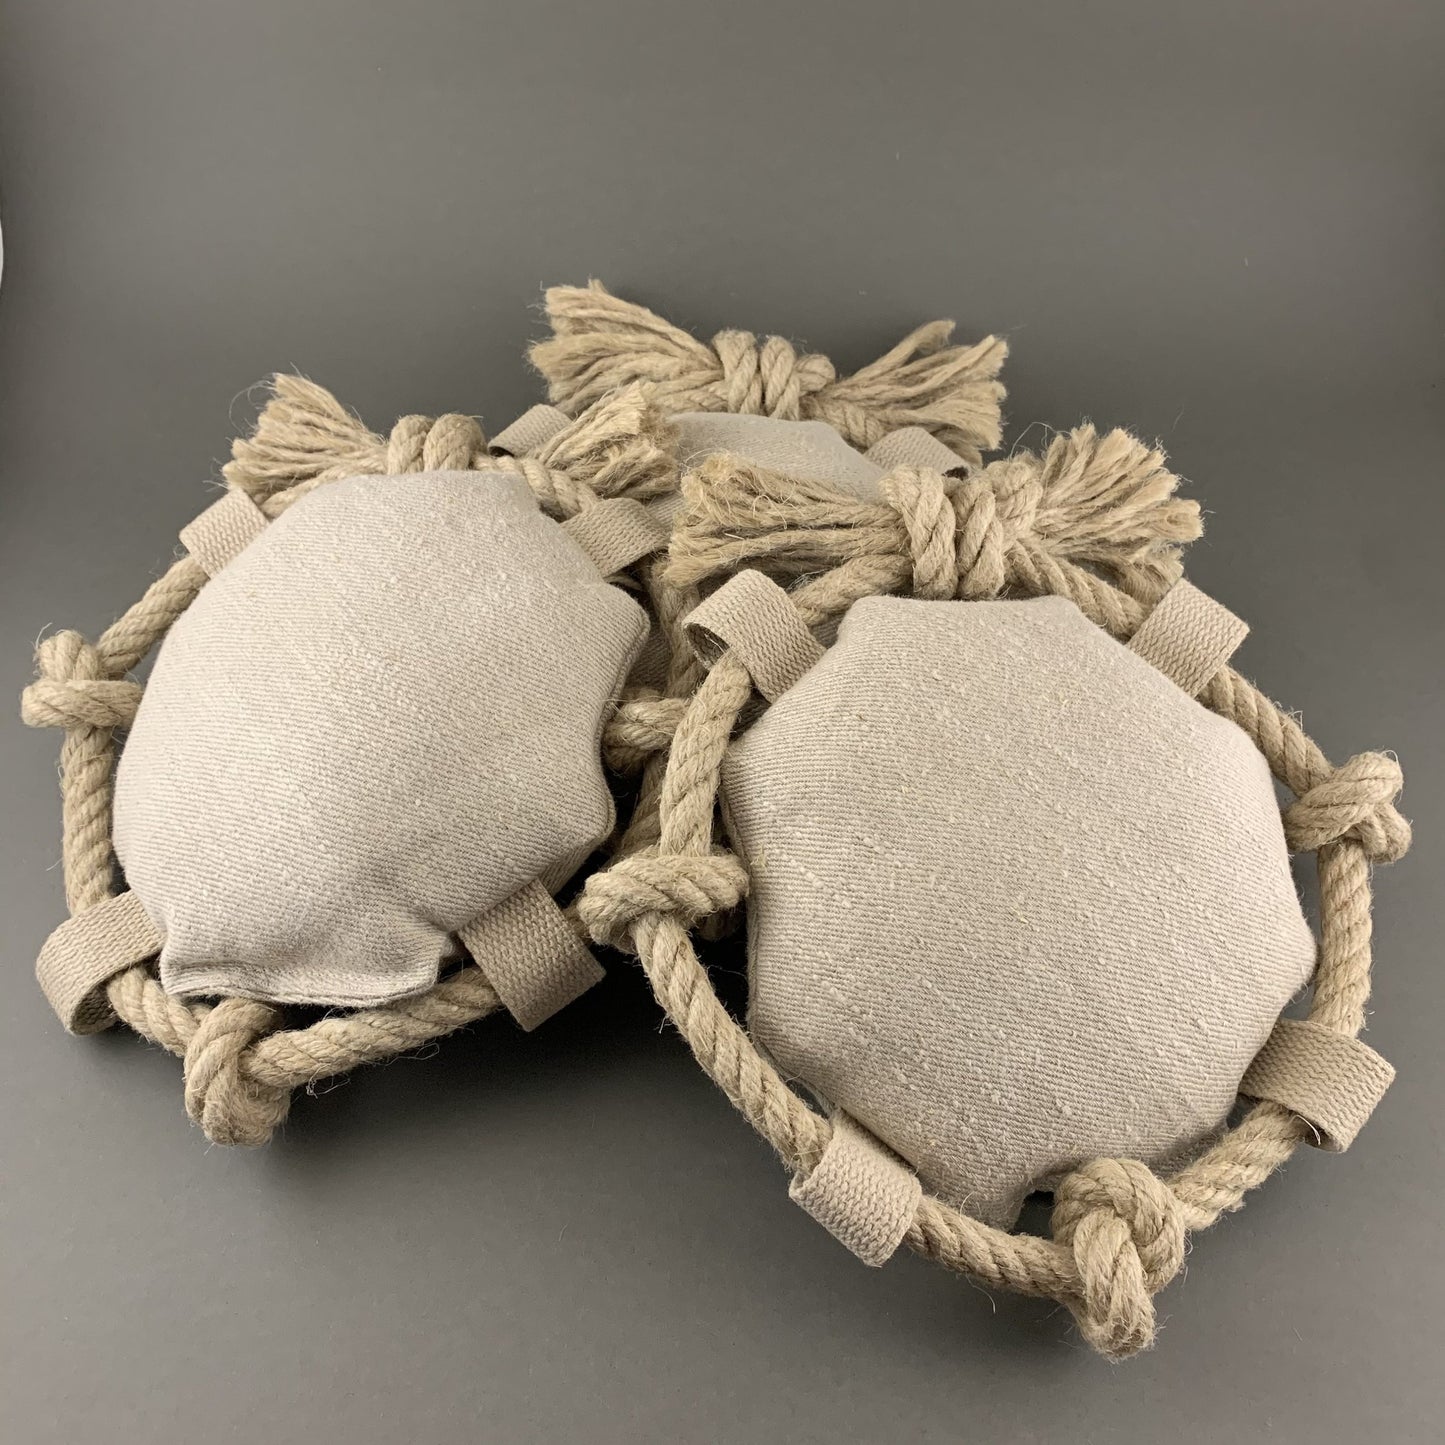 dog toys made from natural hemp fabric and rope